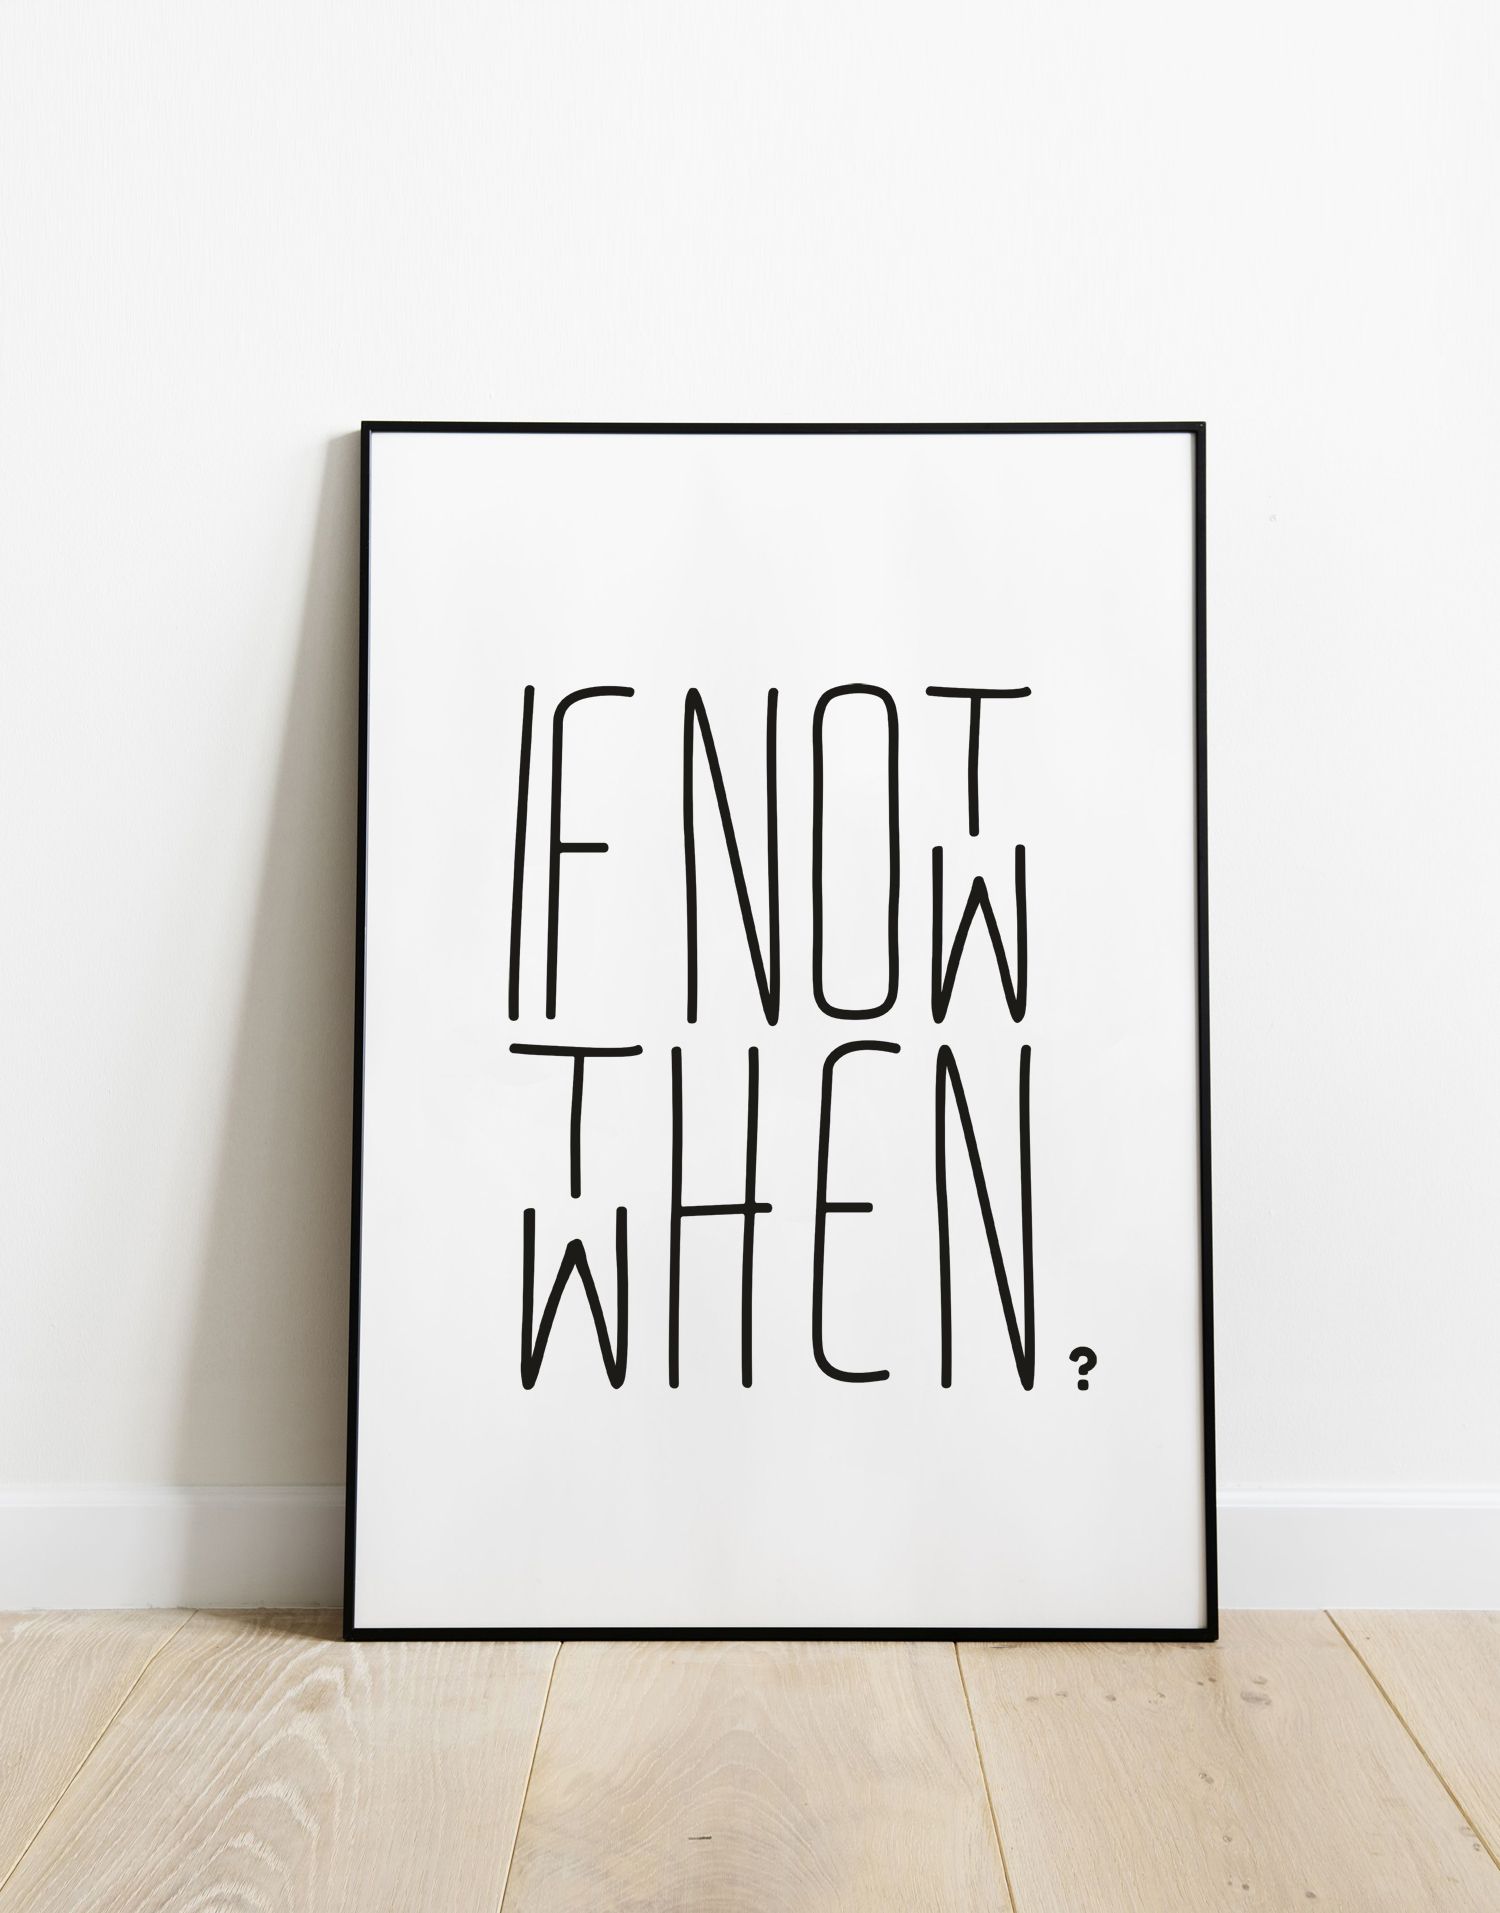 Spice up your walls with wall art quotes